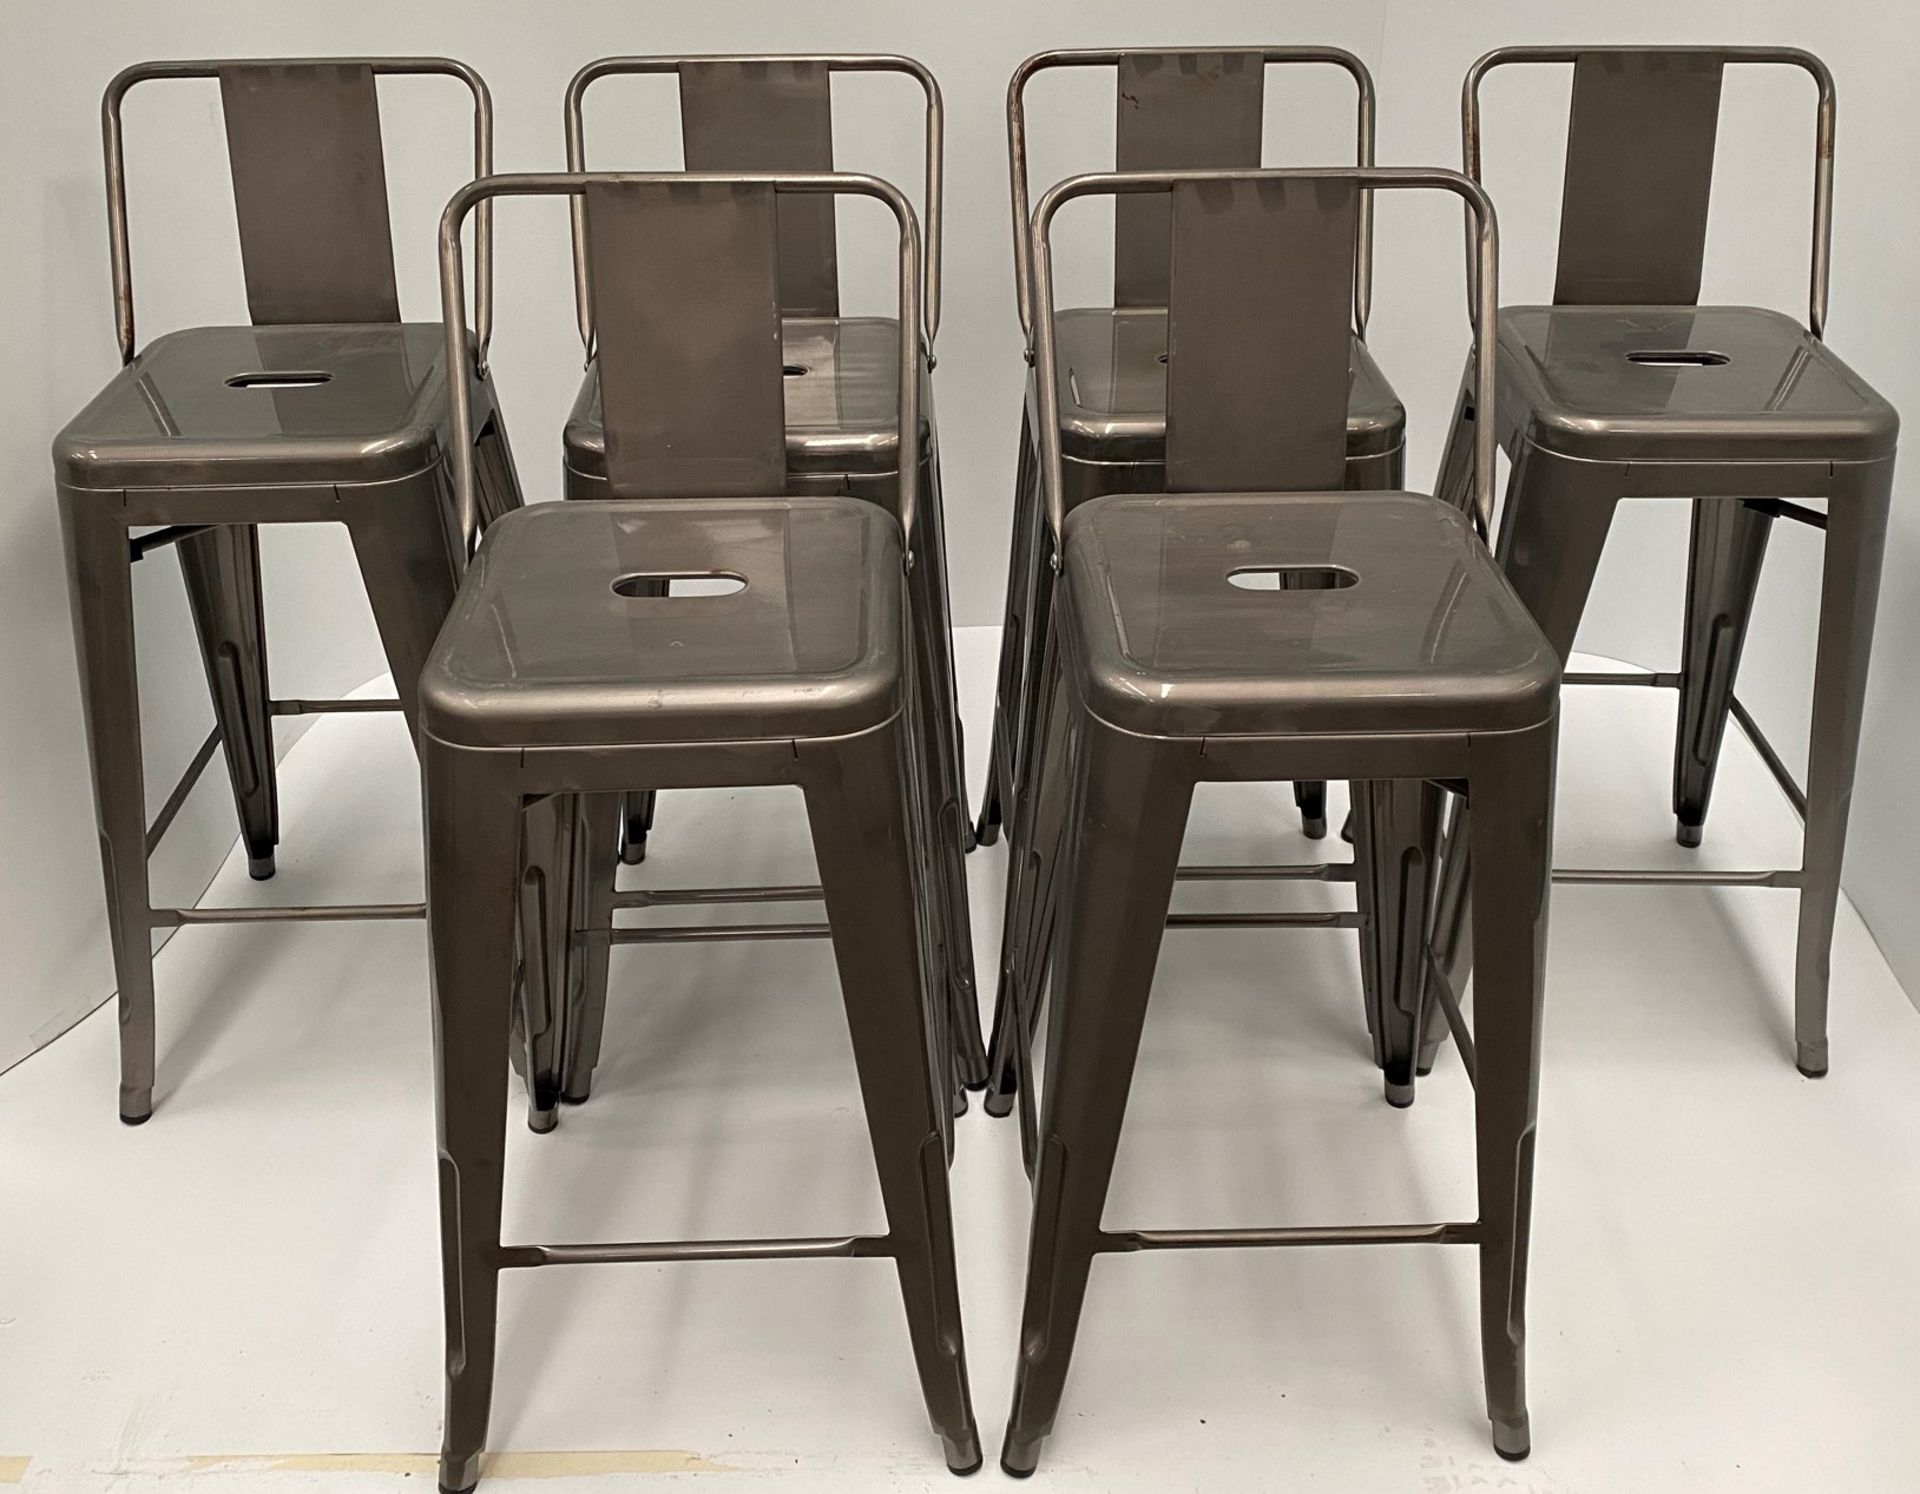 6 x Tolix metal high stools with back (660mm)